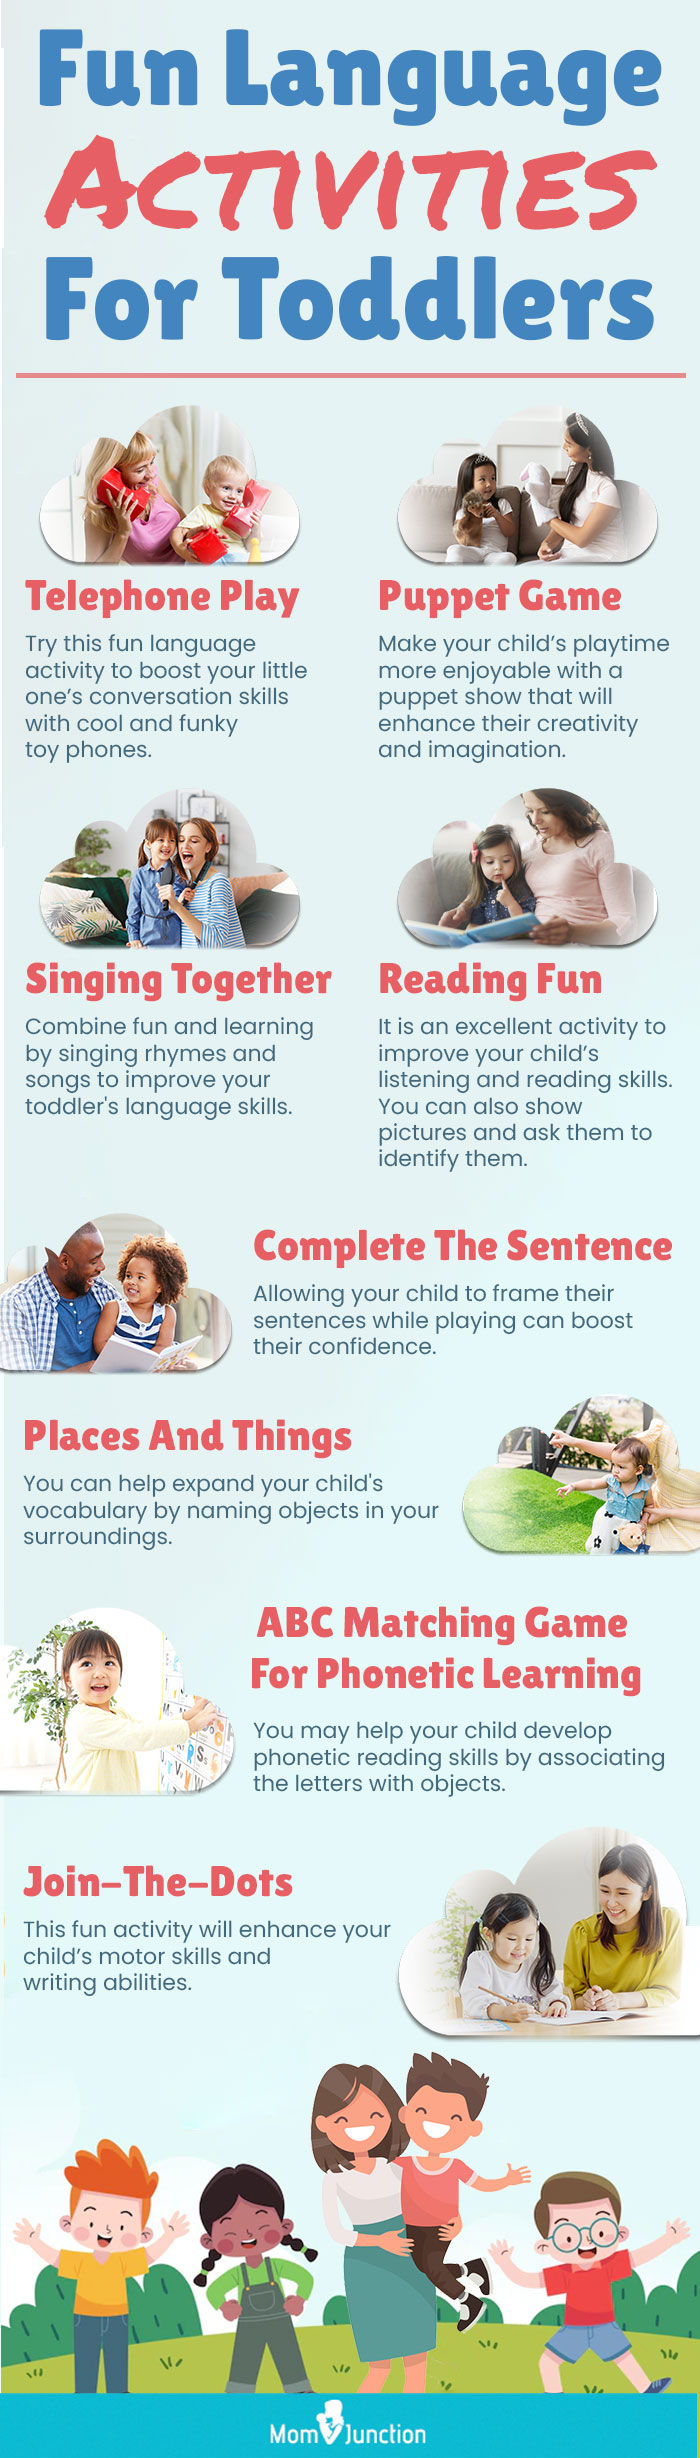 language activities for toddlers (infographic)